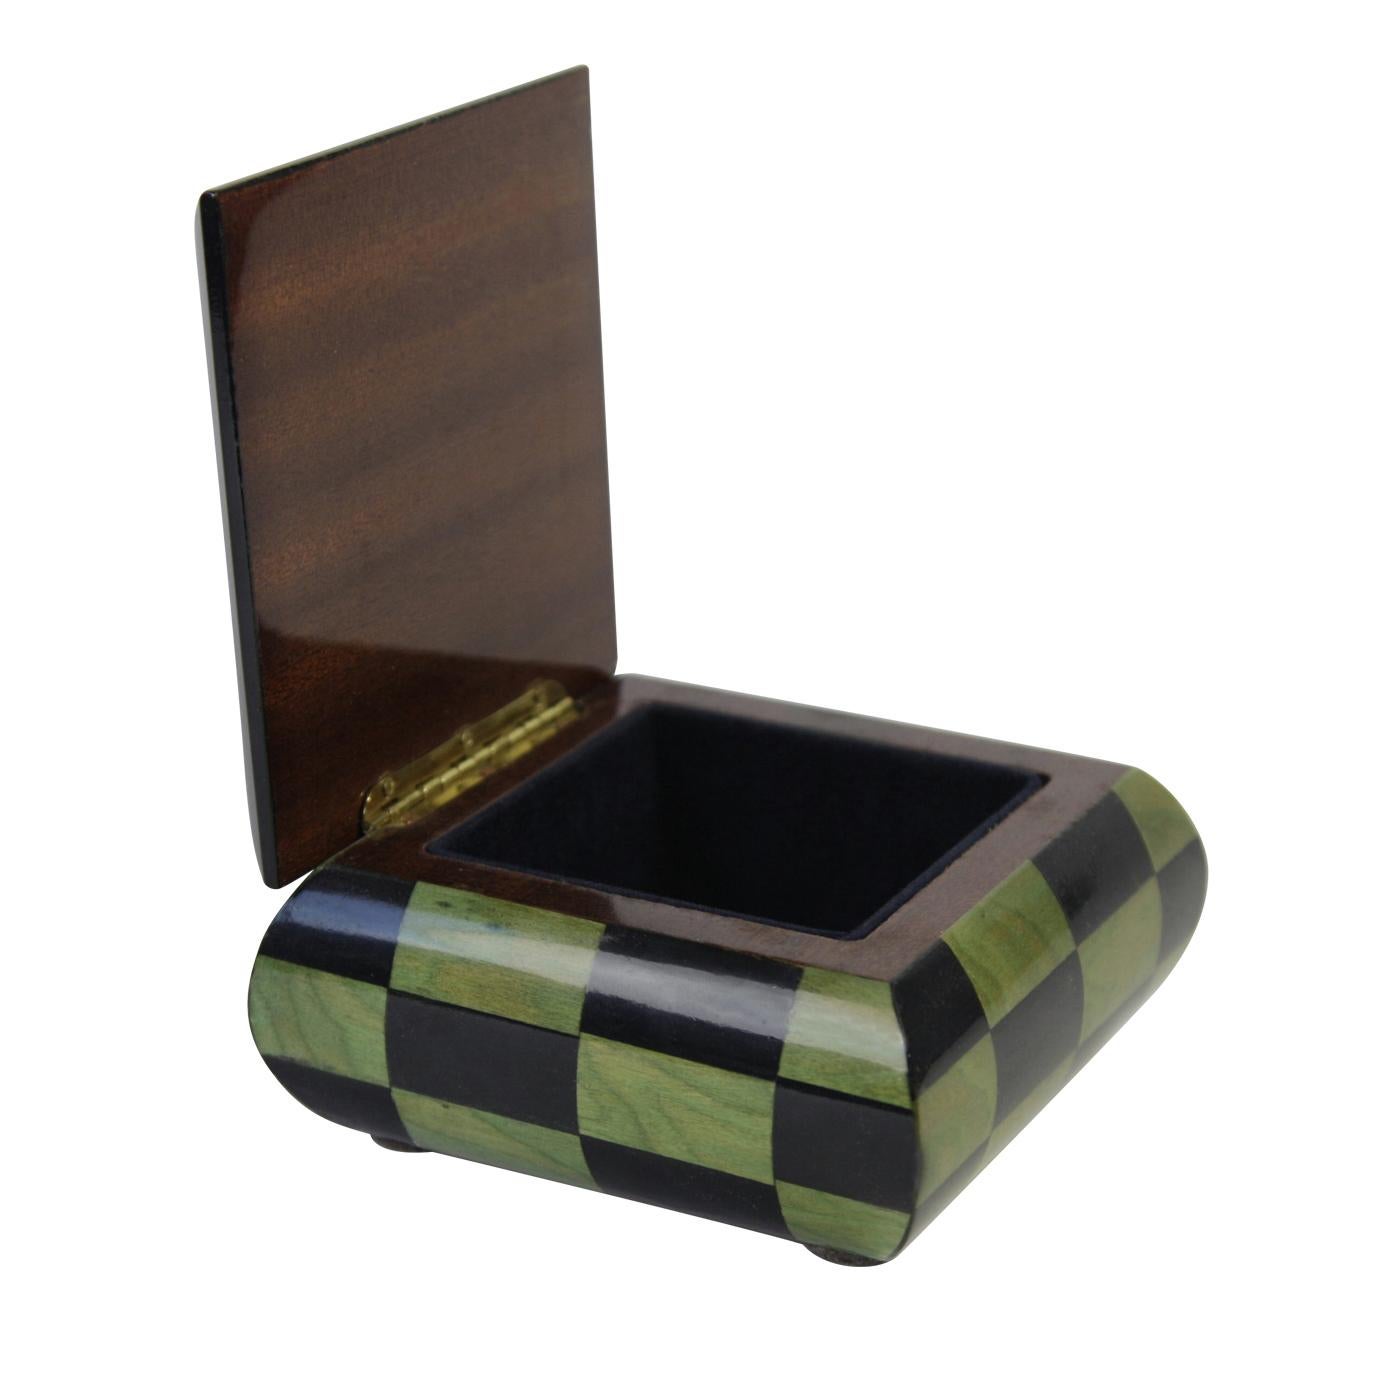 This elegant wooden box is a music box, entirely hand-manufactured according to the ancient traditional techniques of Sorrento marquetry. The exterior is in elegant dark wood, while the lid is decorated with a chess-like pattern of diamonds. Upon